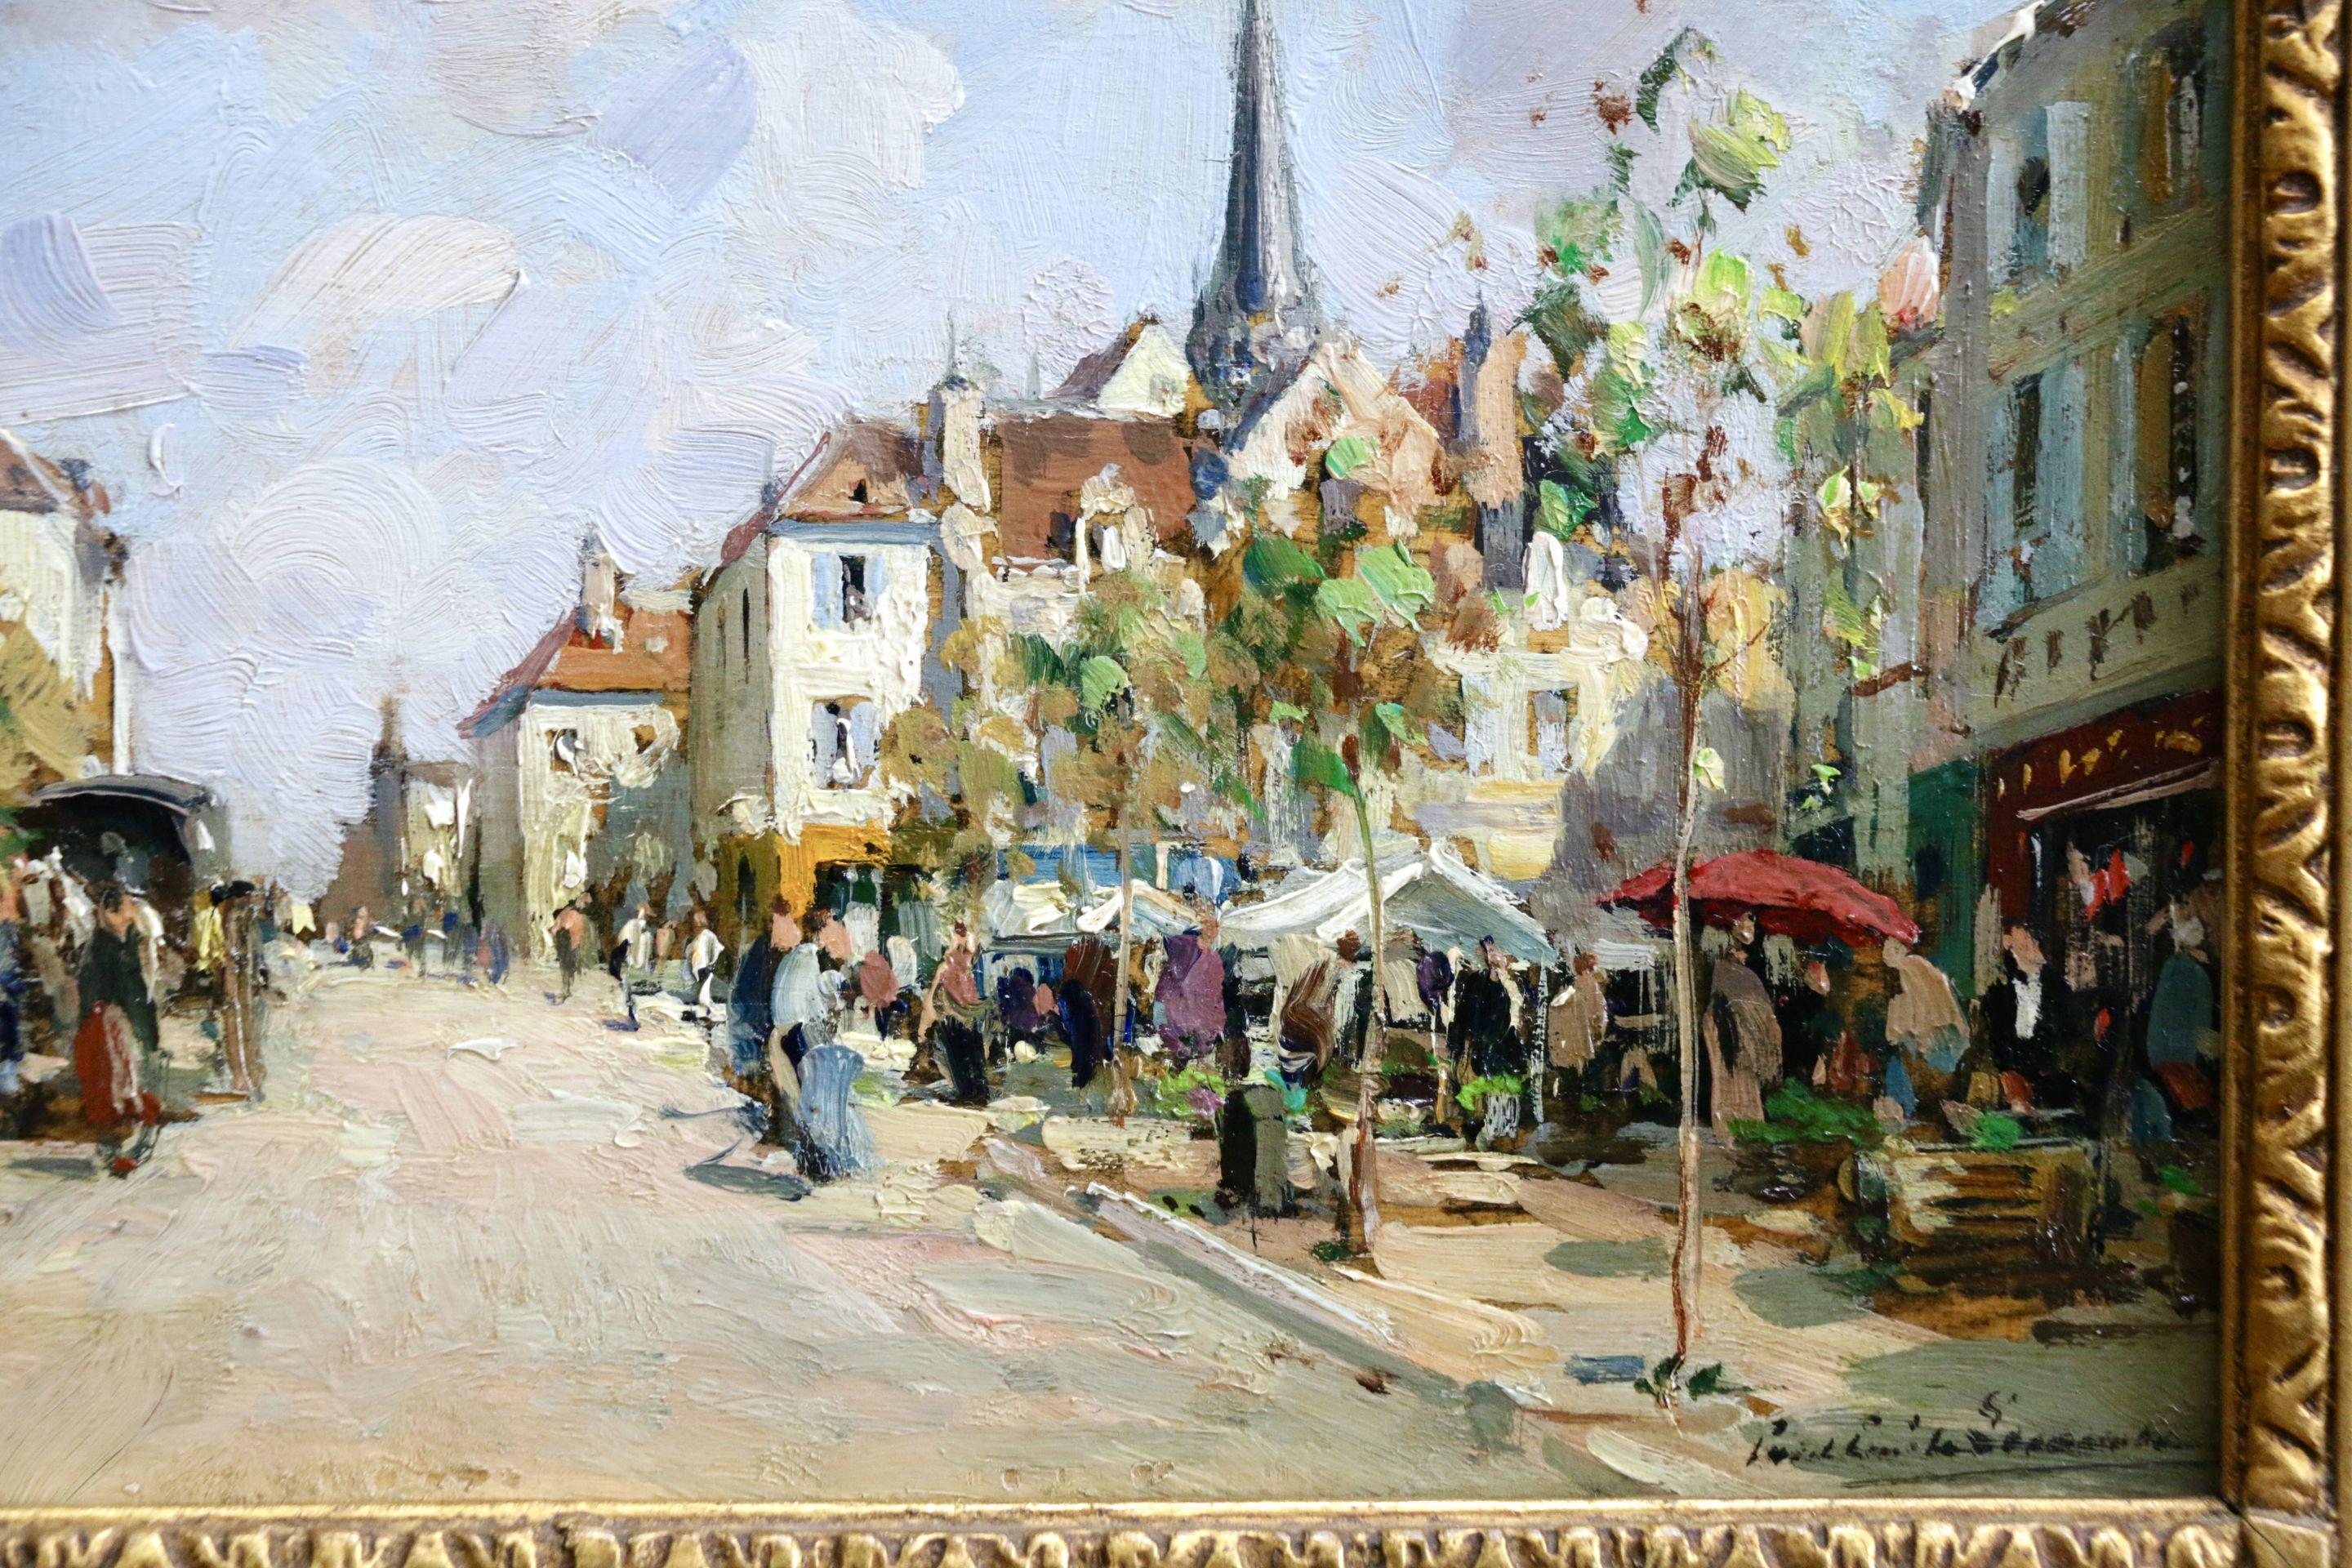 Market Day - 19th Century Oil, Figures in Street Scene Landscape by Paul Lecomte - Brown Figurative Painting by Paul Emile Lecomte